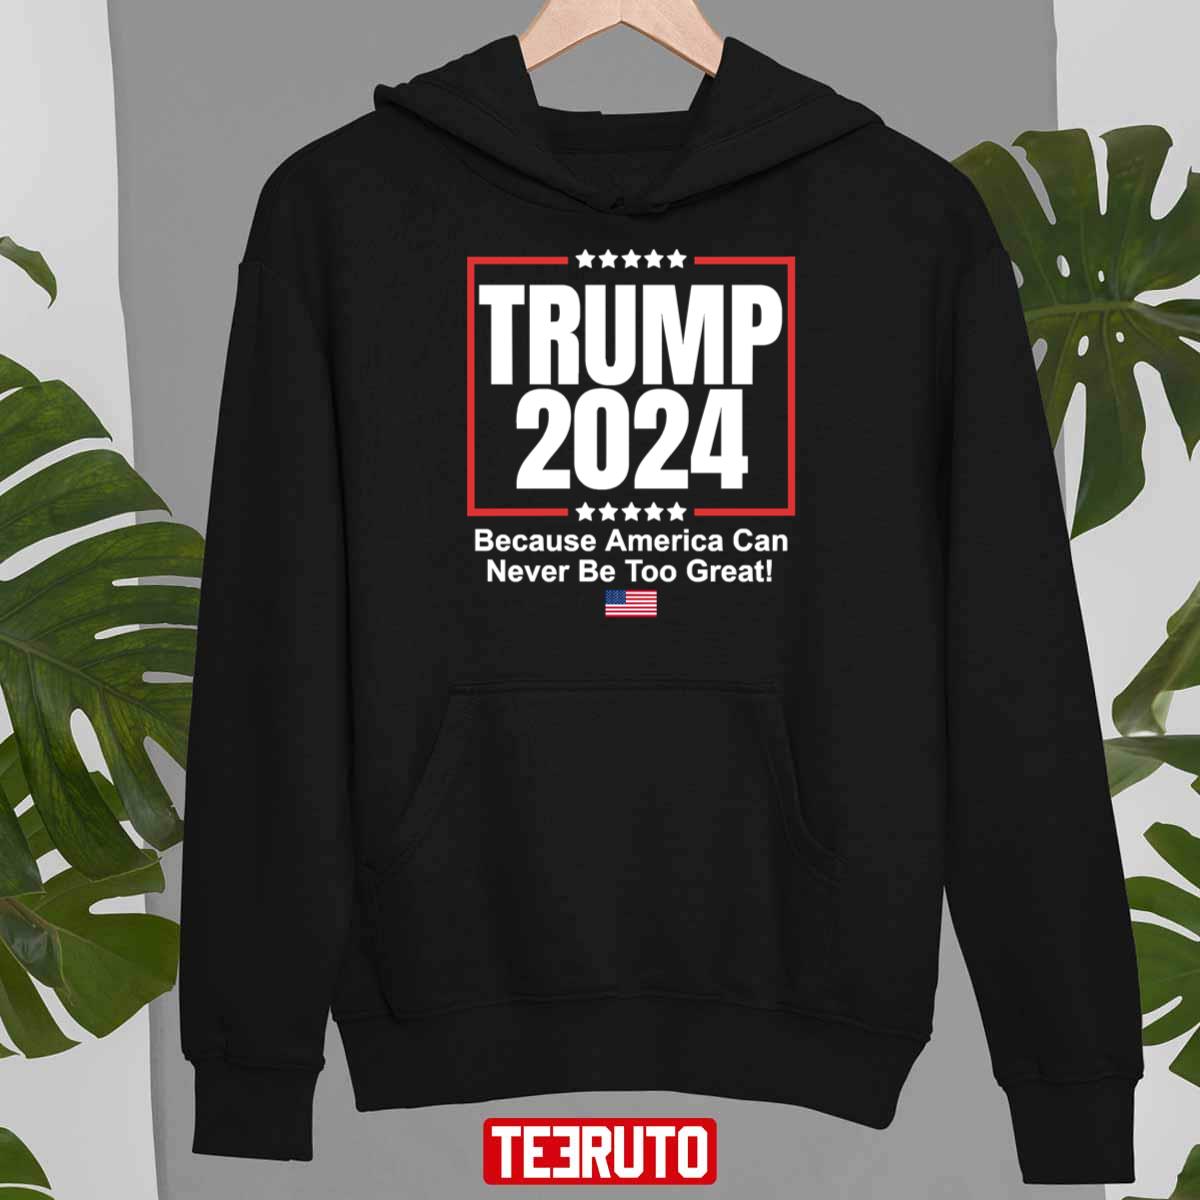 Trump 2024 Because America Can Never Be Too Great Unisex T-Shirt